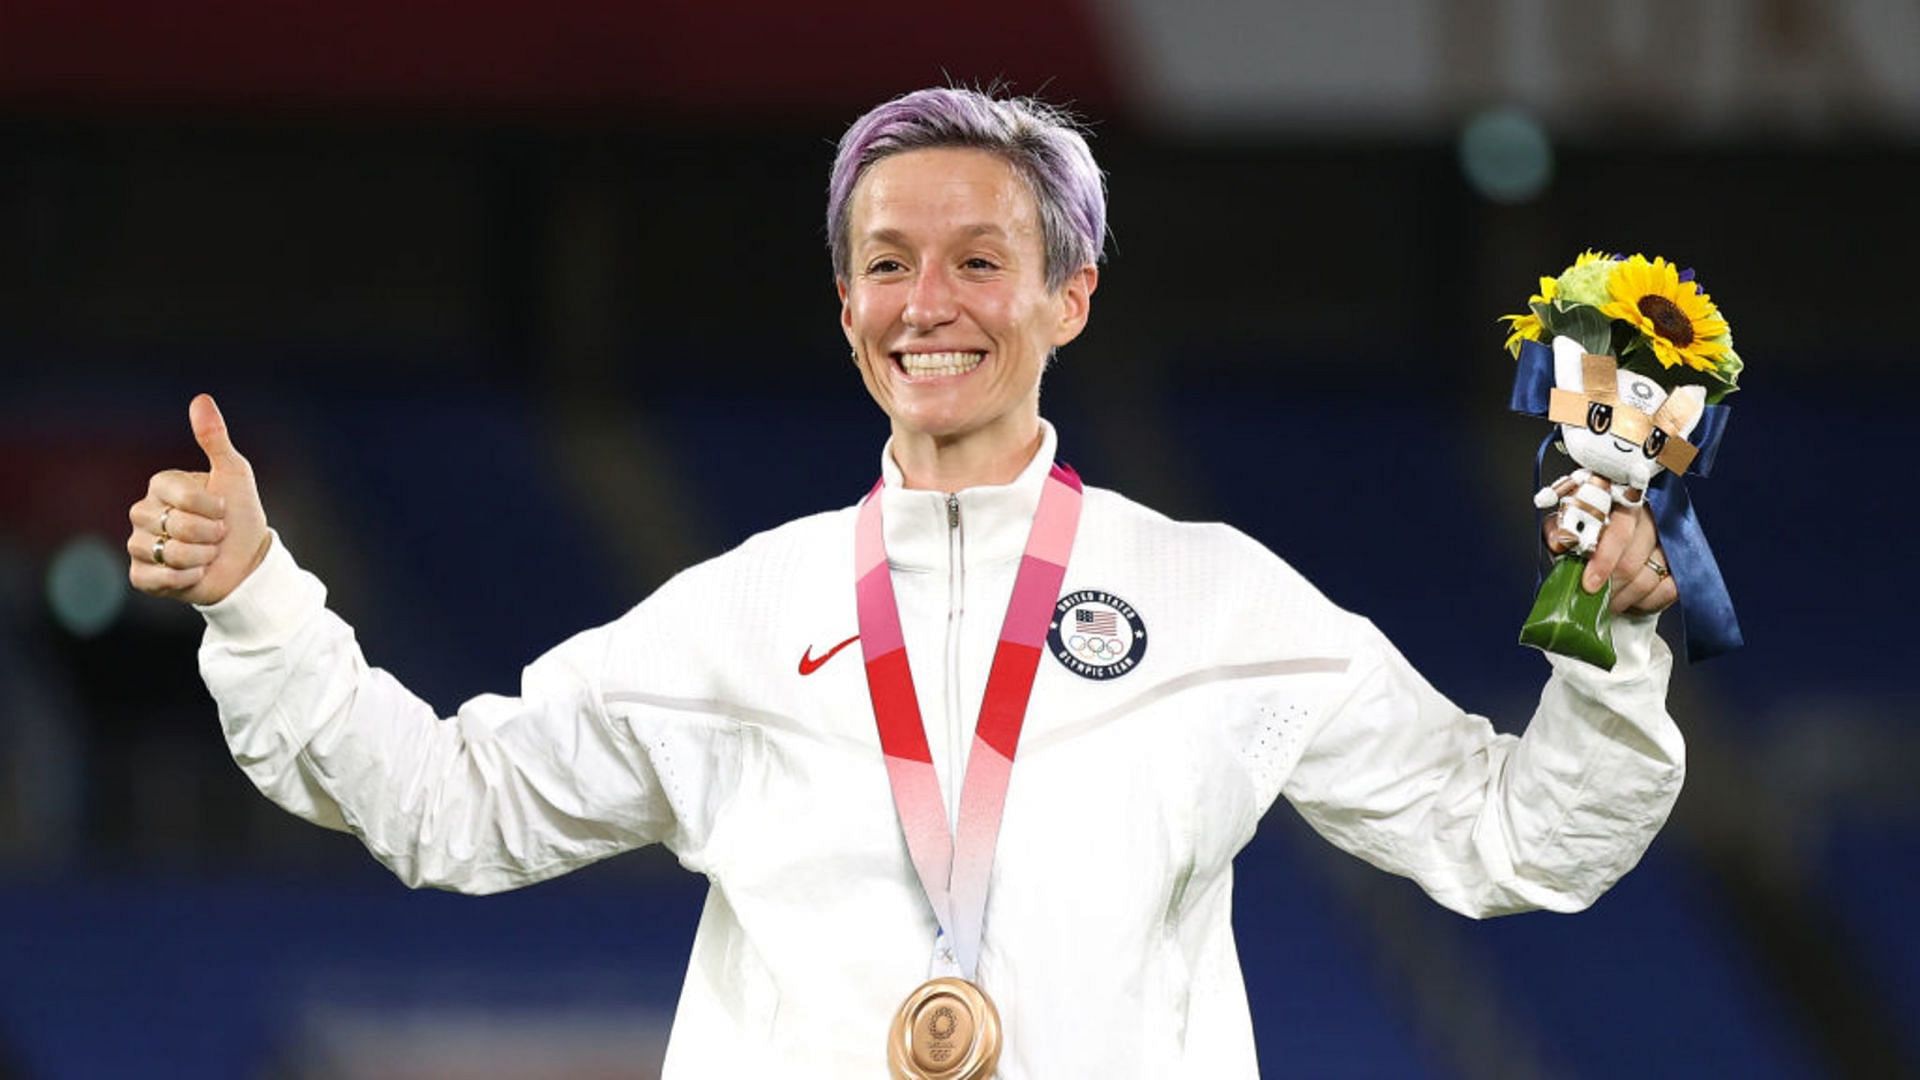 Megan Rapinoe with her Bronze medal at the 2020 Summer Olympics in Tokyo (Image via Olympics)